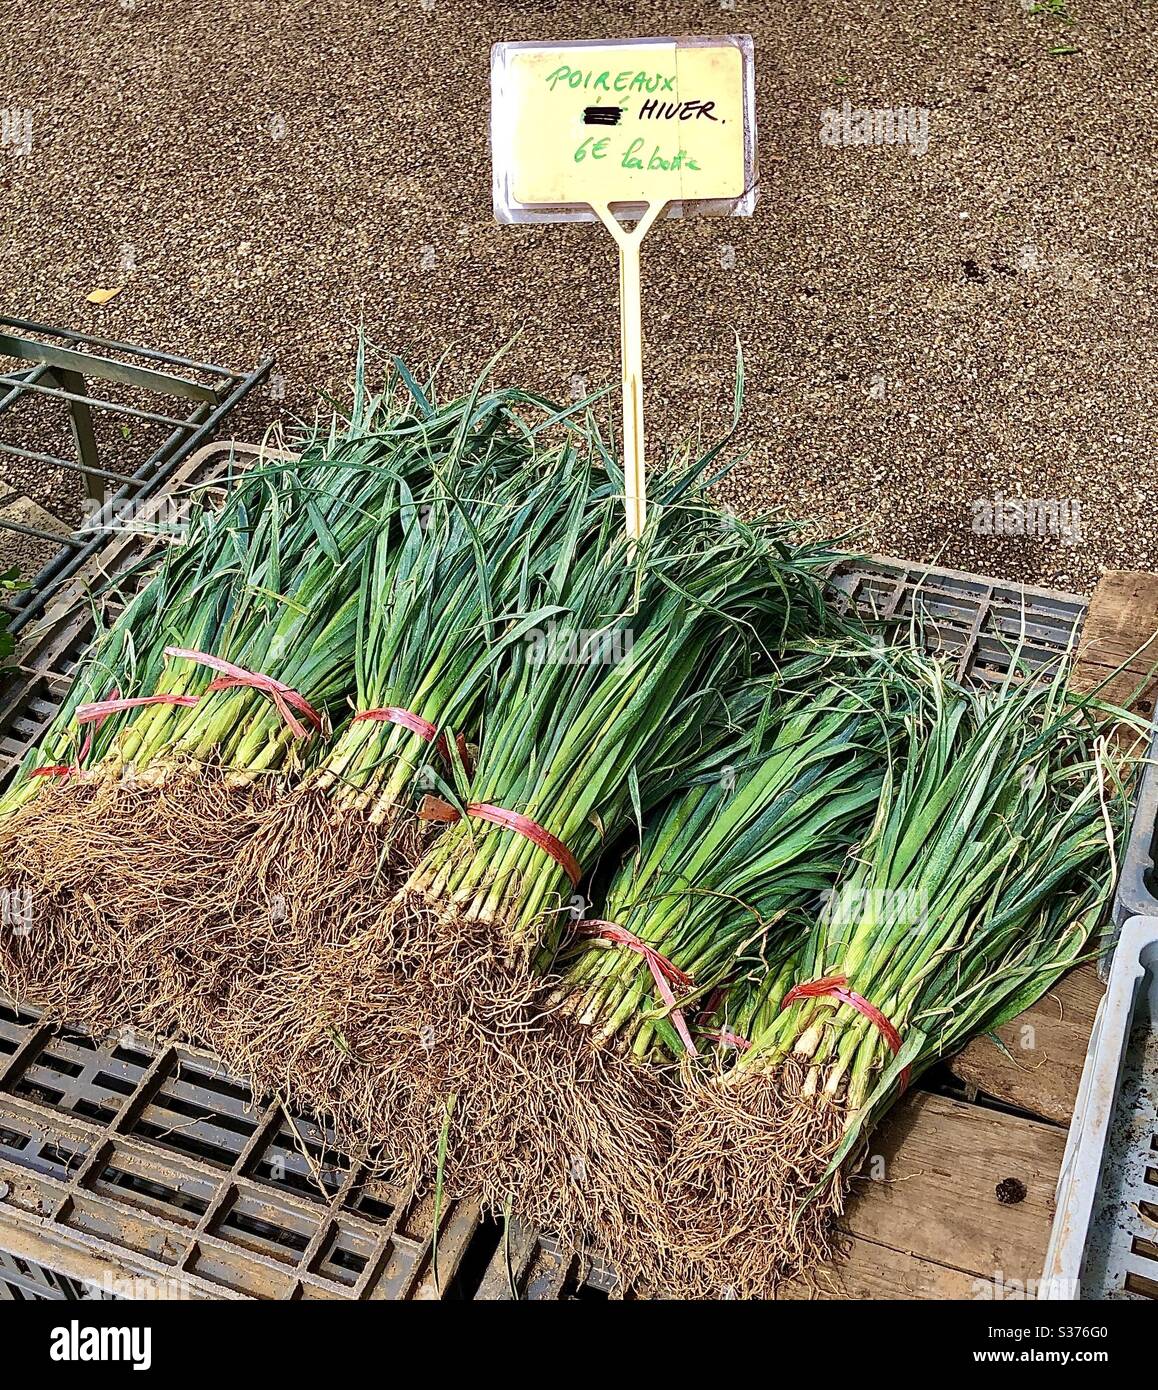 Bunches of Leeks for sale on French market stall. Stock Photo